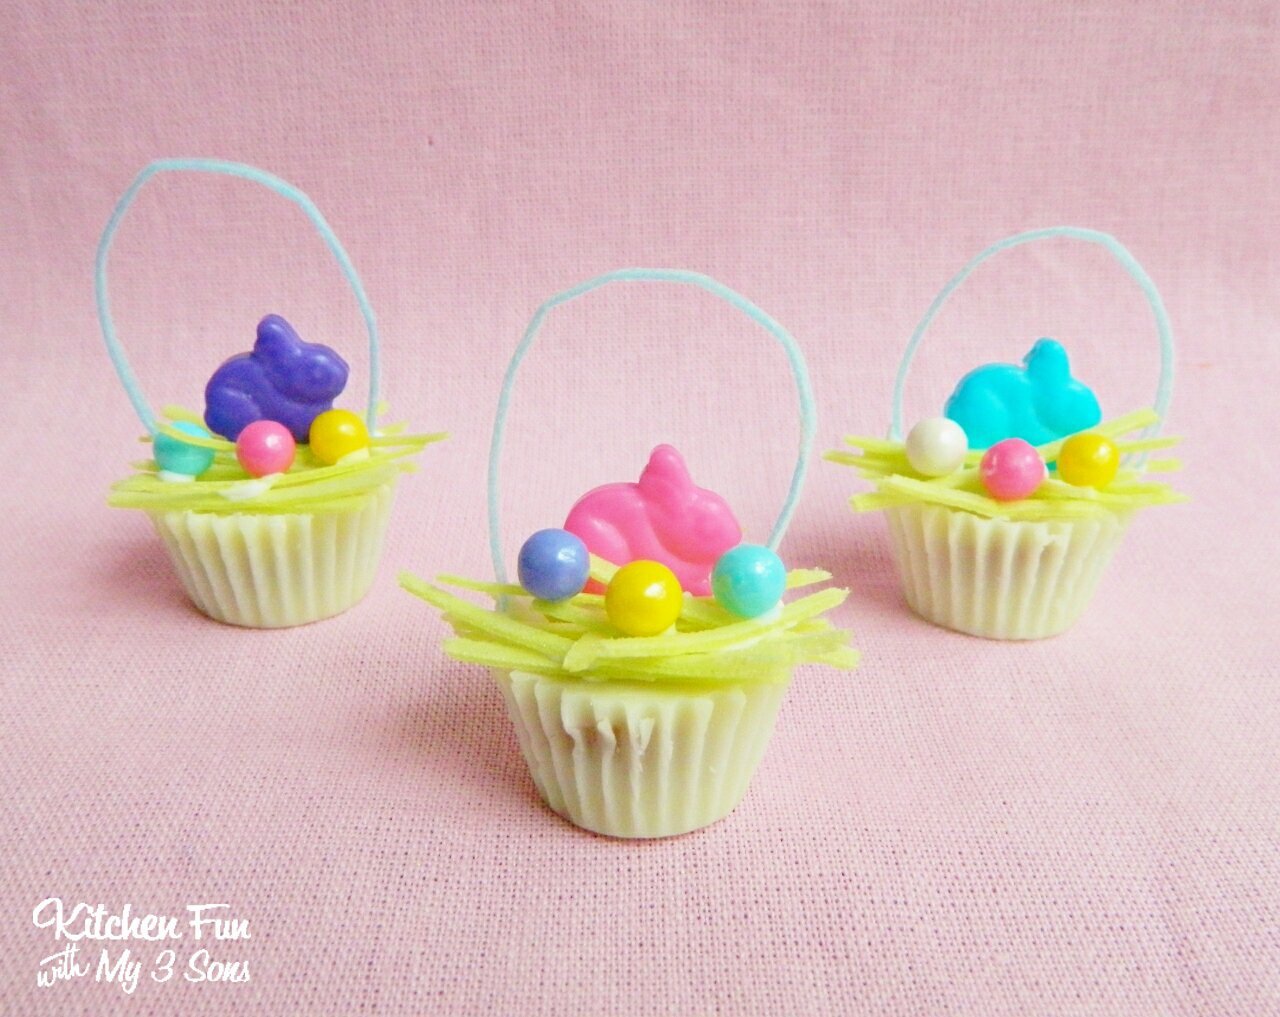 Mini Reese's Cup Easter Baskets